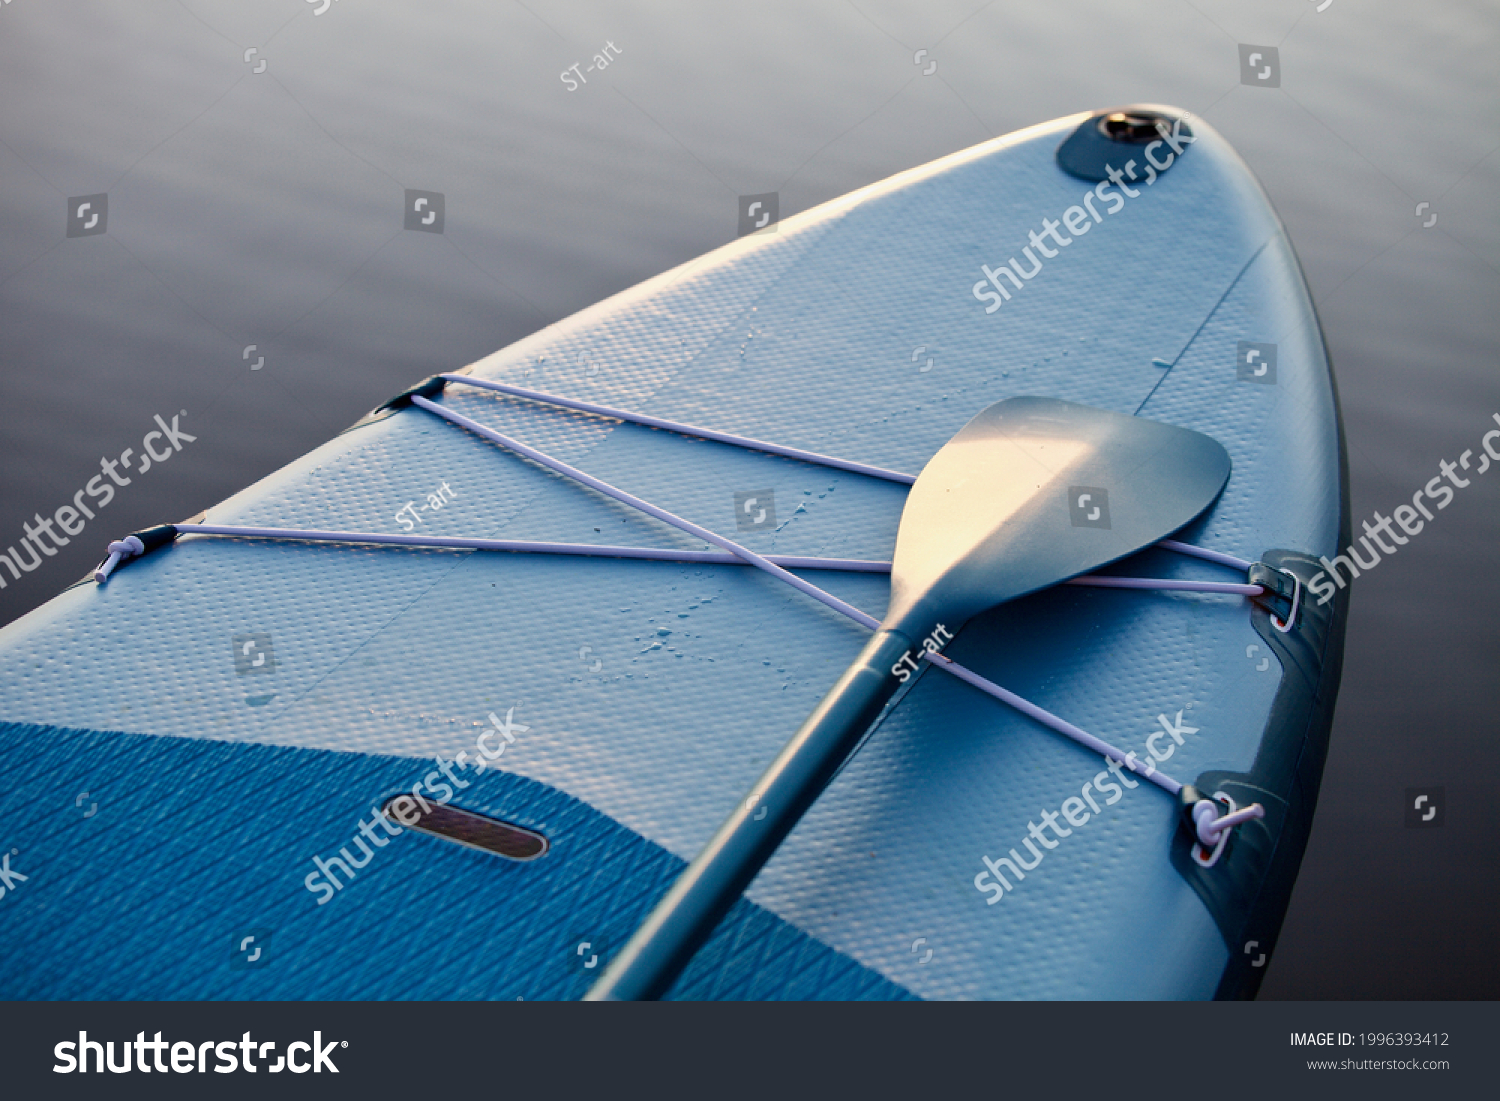 Paddle board and surf board with paddle on blue water surface background close up. Surfing and SUP boarding equipment in sunset lights close-up. Outdoor water sports. Surfing lifestyle backgrounds. #1996393412